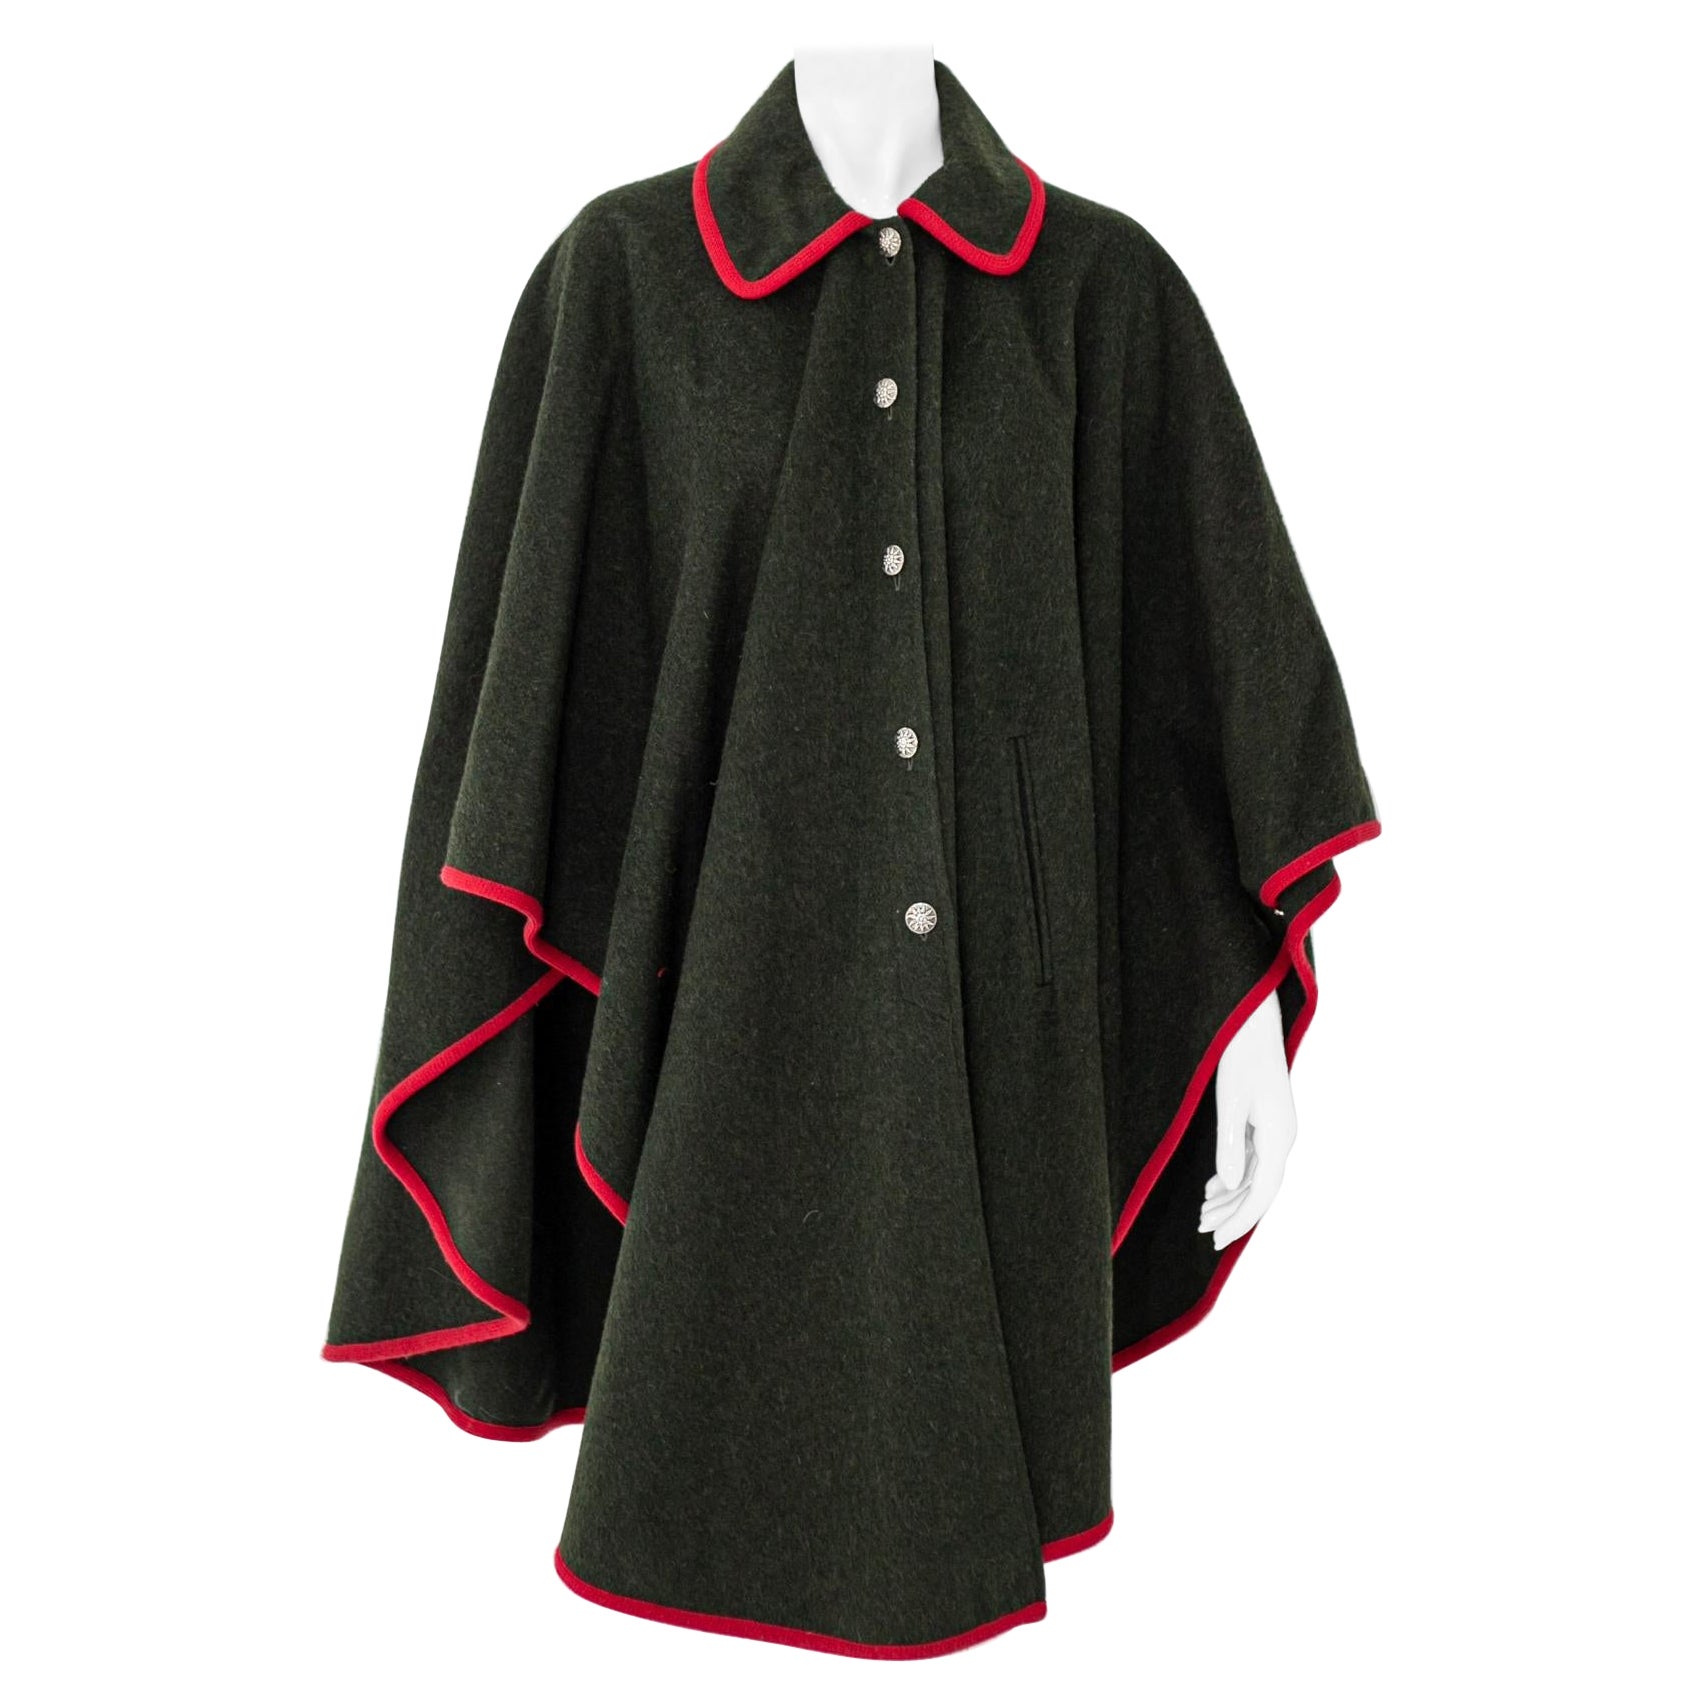 Fiorelle Vintage Capee in Green Wool and Red Profiles For Sale